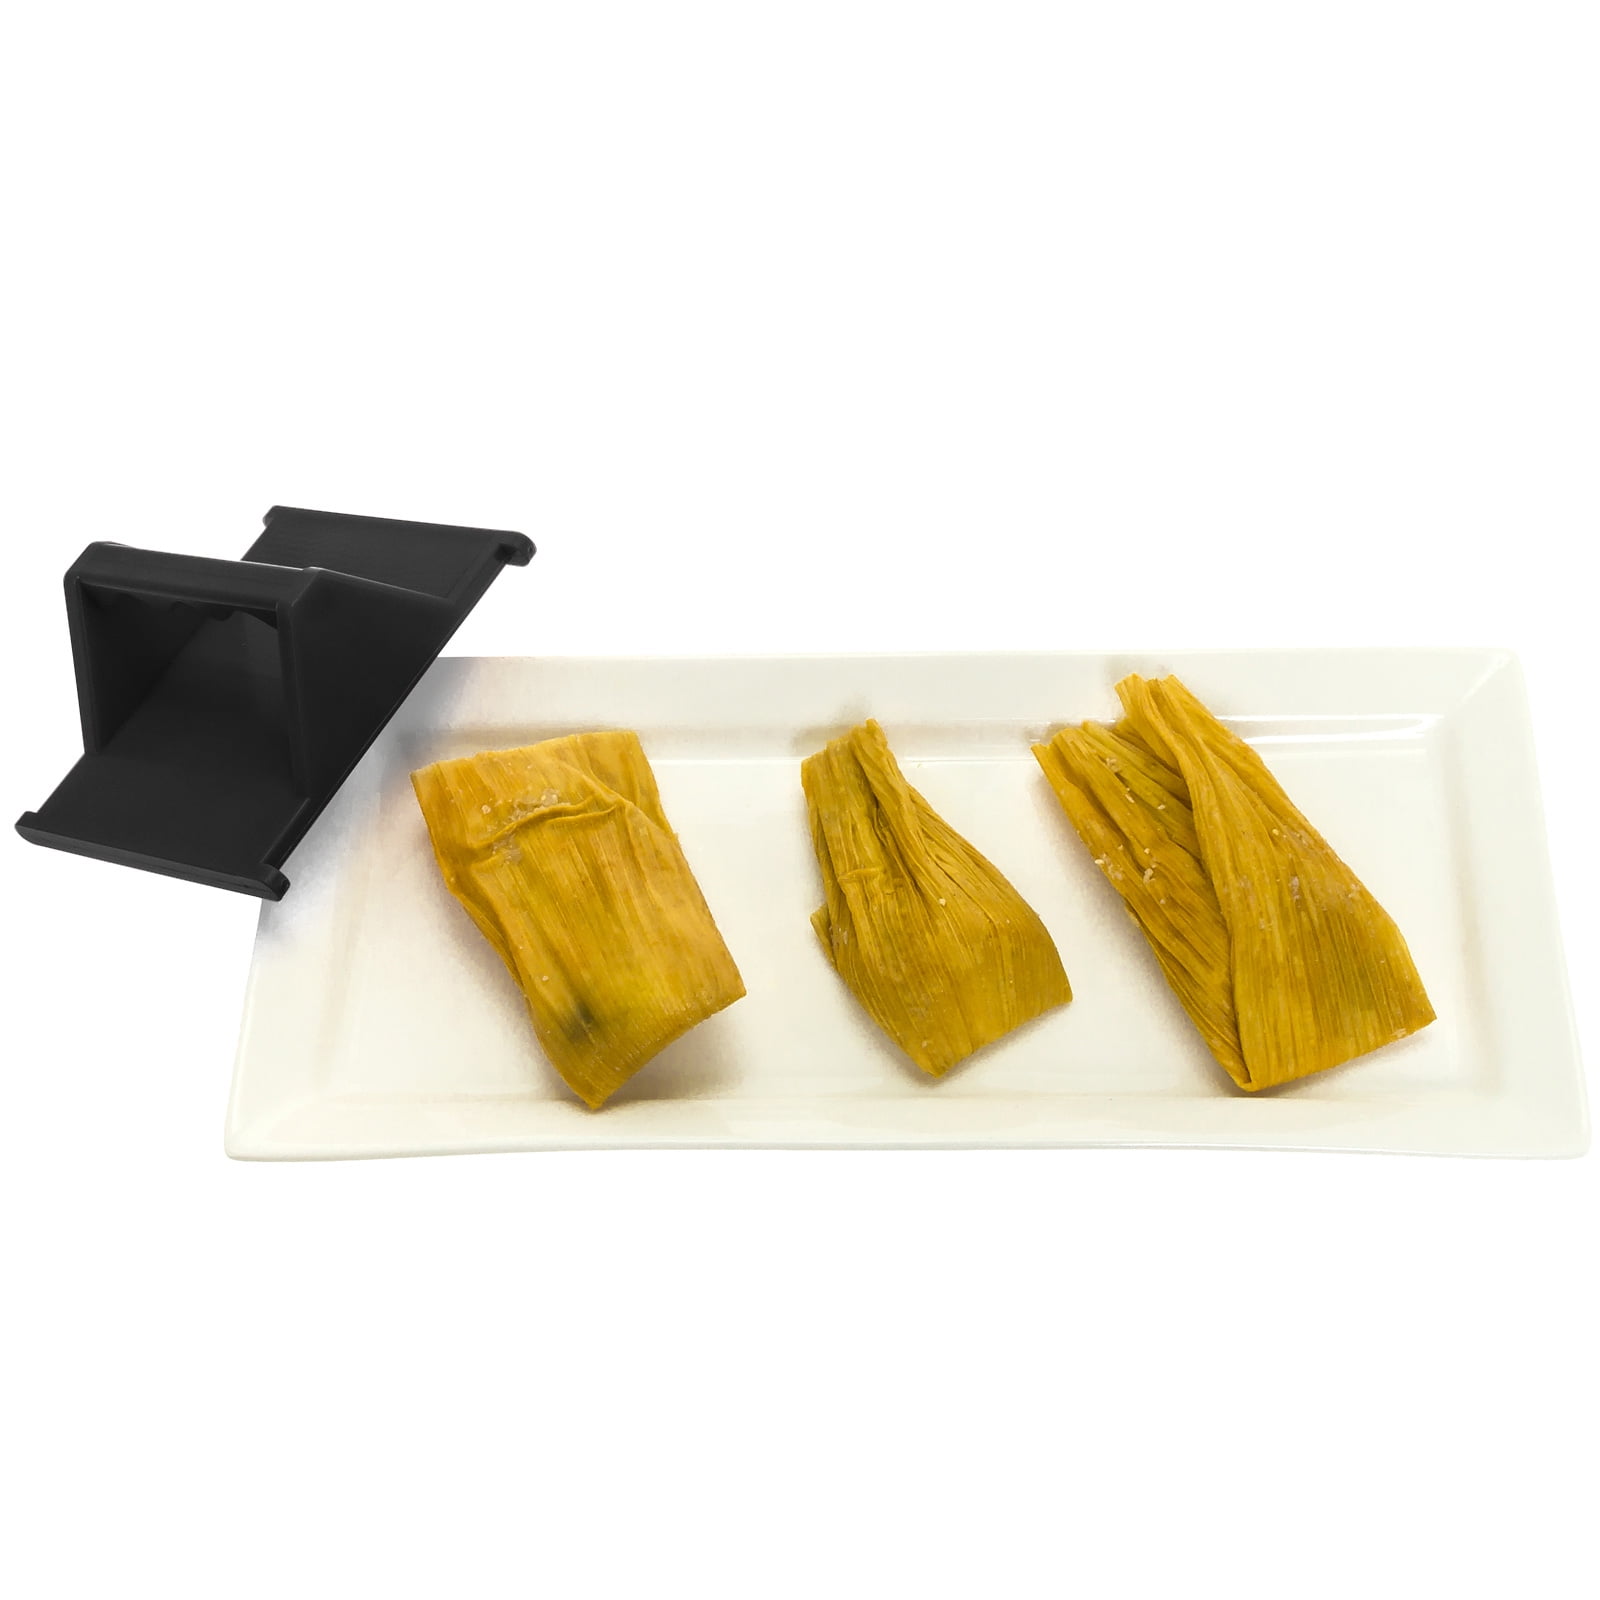  Tamales Masa Spreader, 2 Pcs Pack, Improved Grip Design, Masa  Spreader For Tamales, Easy to Use Tool For Making Tamales, Tamale  Spreader Tool